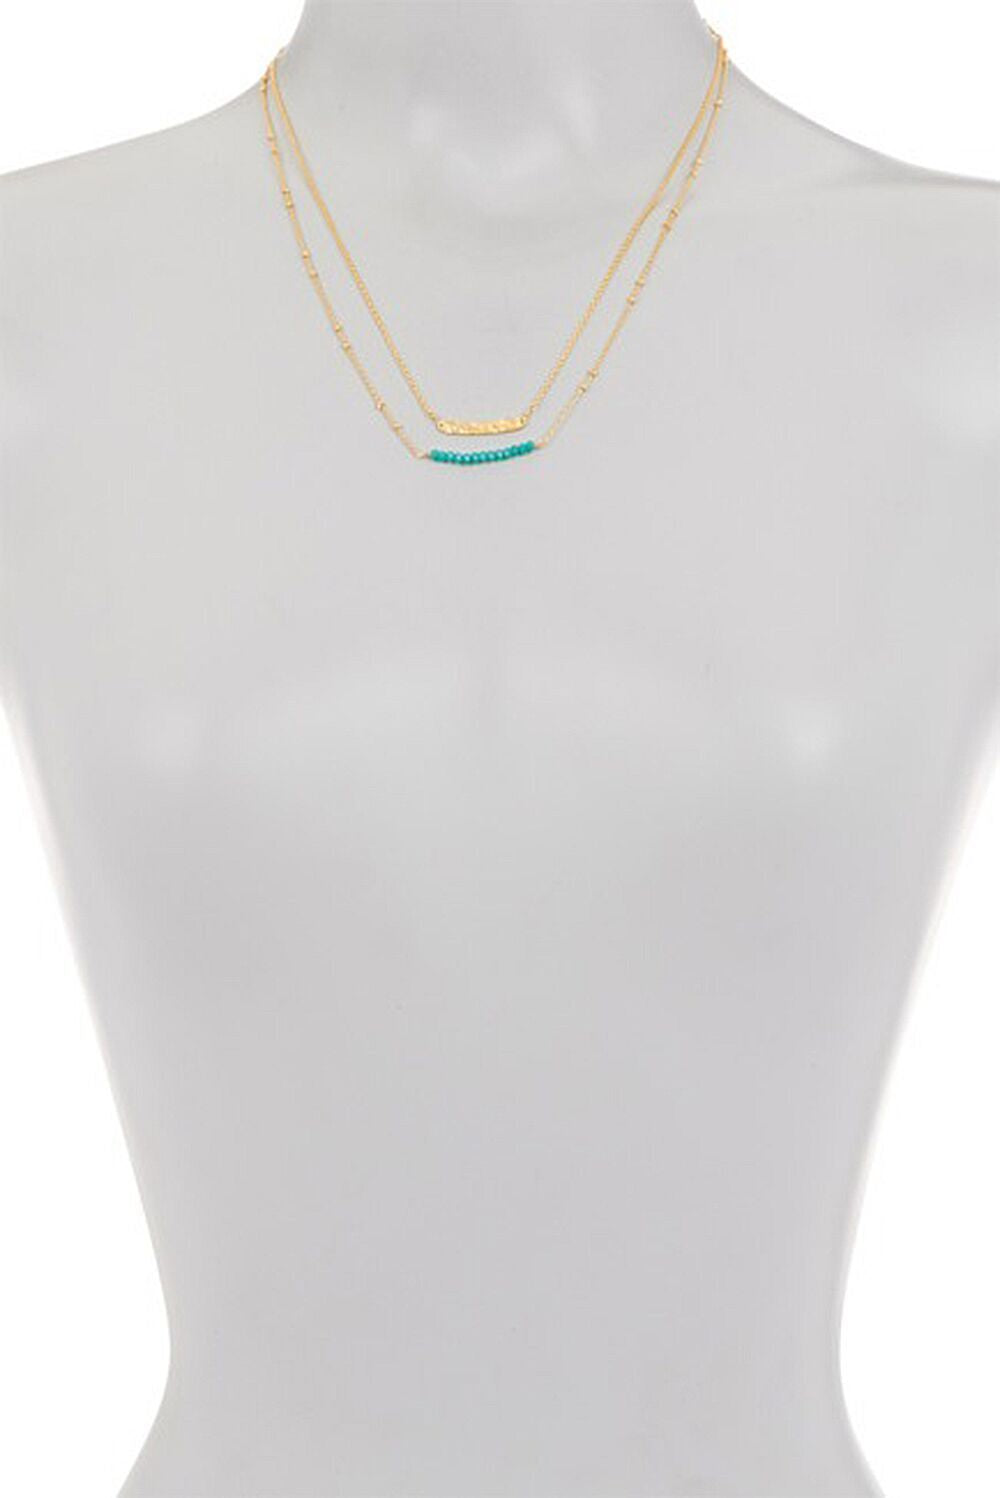 Laguna Collections Double Stranded Aqua Chalcedony Stones with Bar Necklace